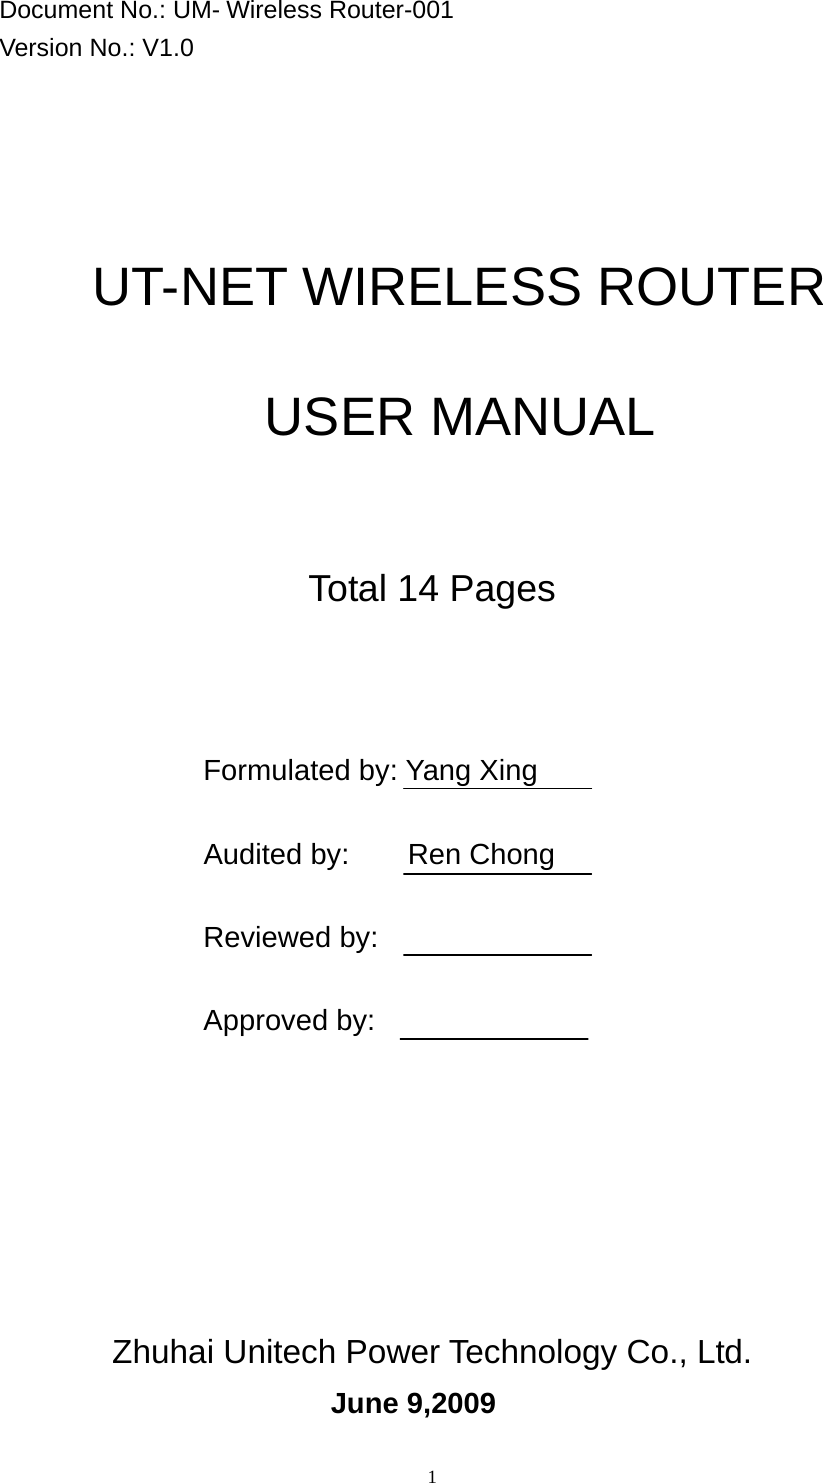 1 Document No.: UM- Wireless Router-001 Version No.: V1.0      UT-NET WIRELESS ROUTER  USER MANUAL     Total 14 Pages      Formulated by: Yang Xing               Audited by:    Ren Chong               Reviewed by:                 Approved by:      Zhuhai Unitech Power Technology Co., Ltd.   June 9,2009 